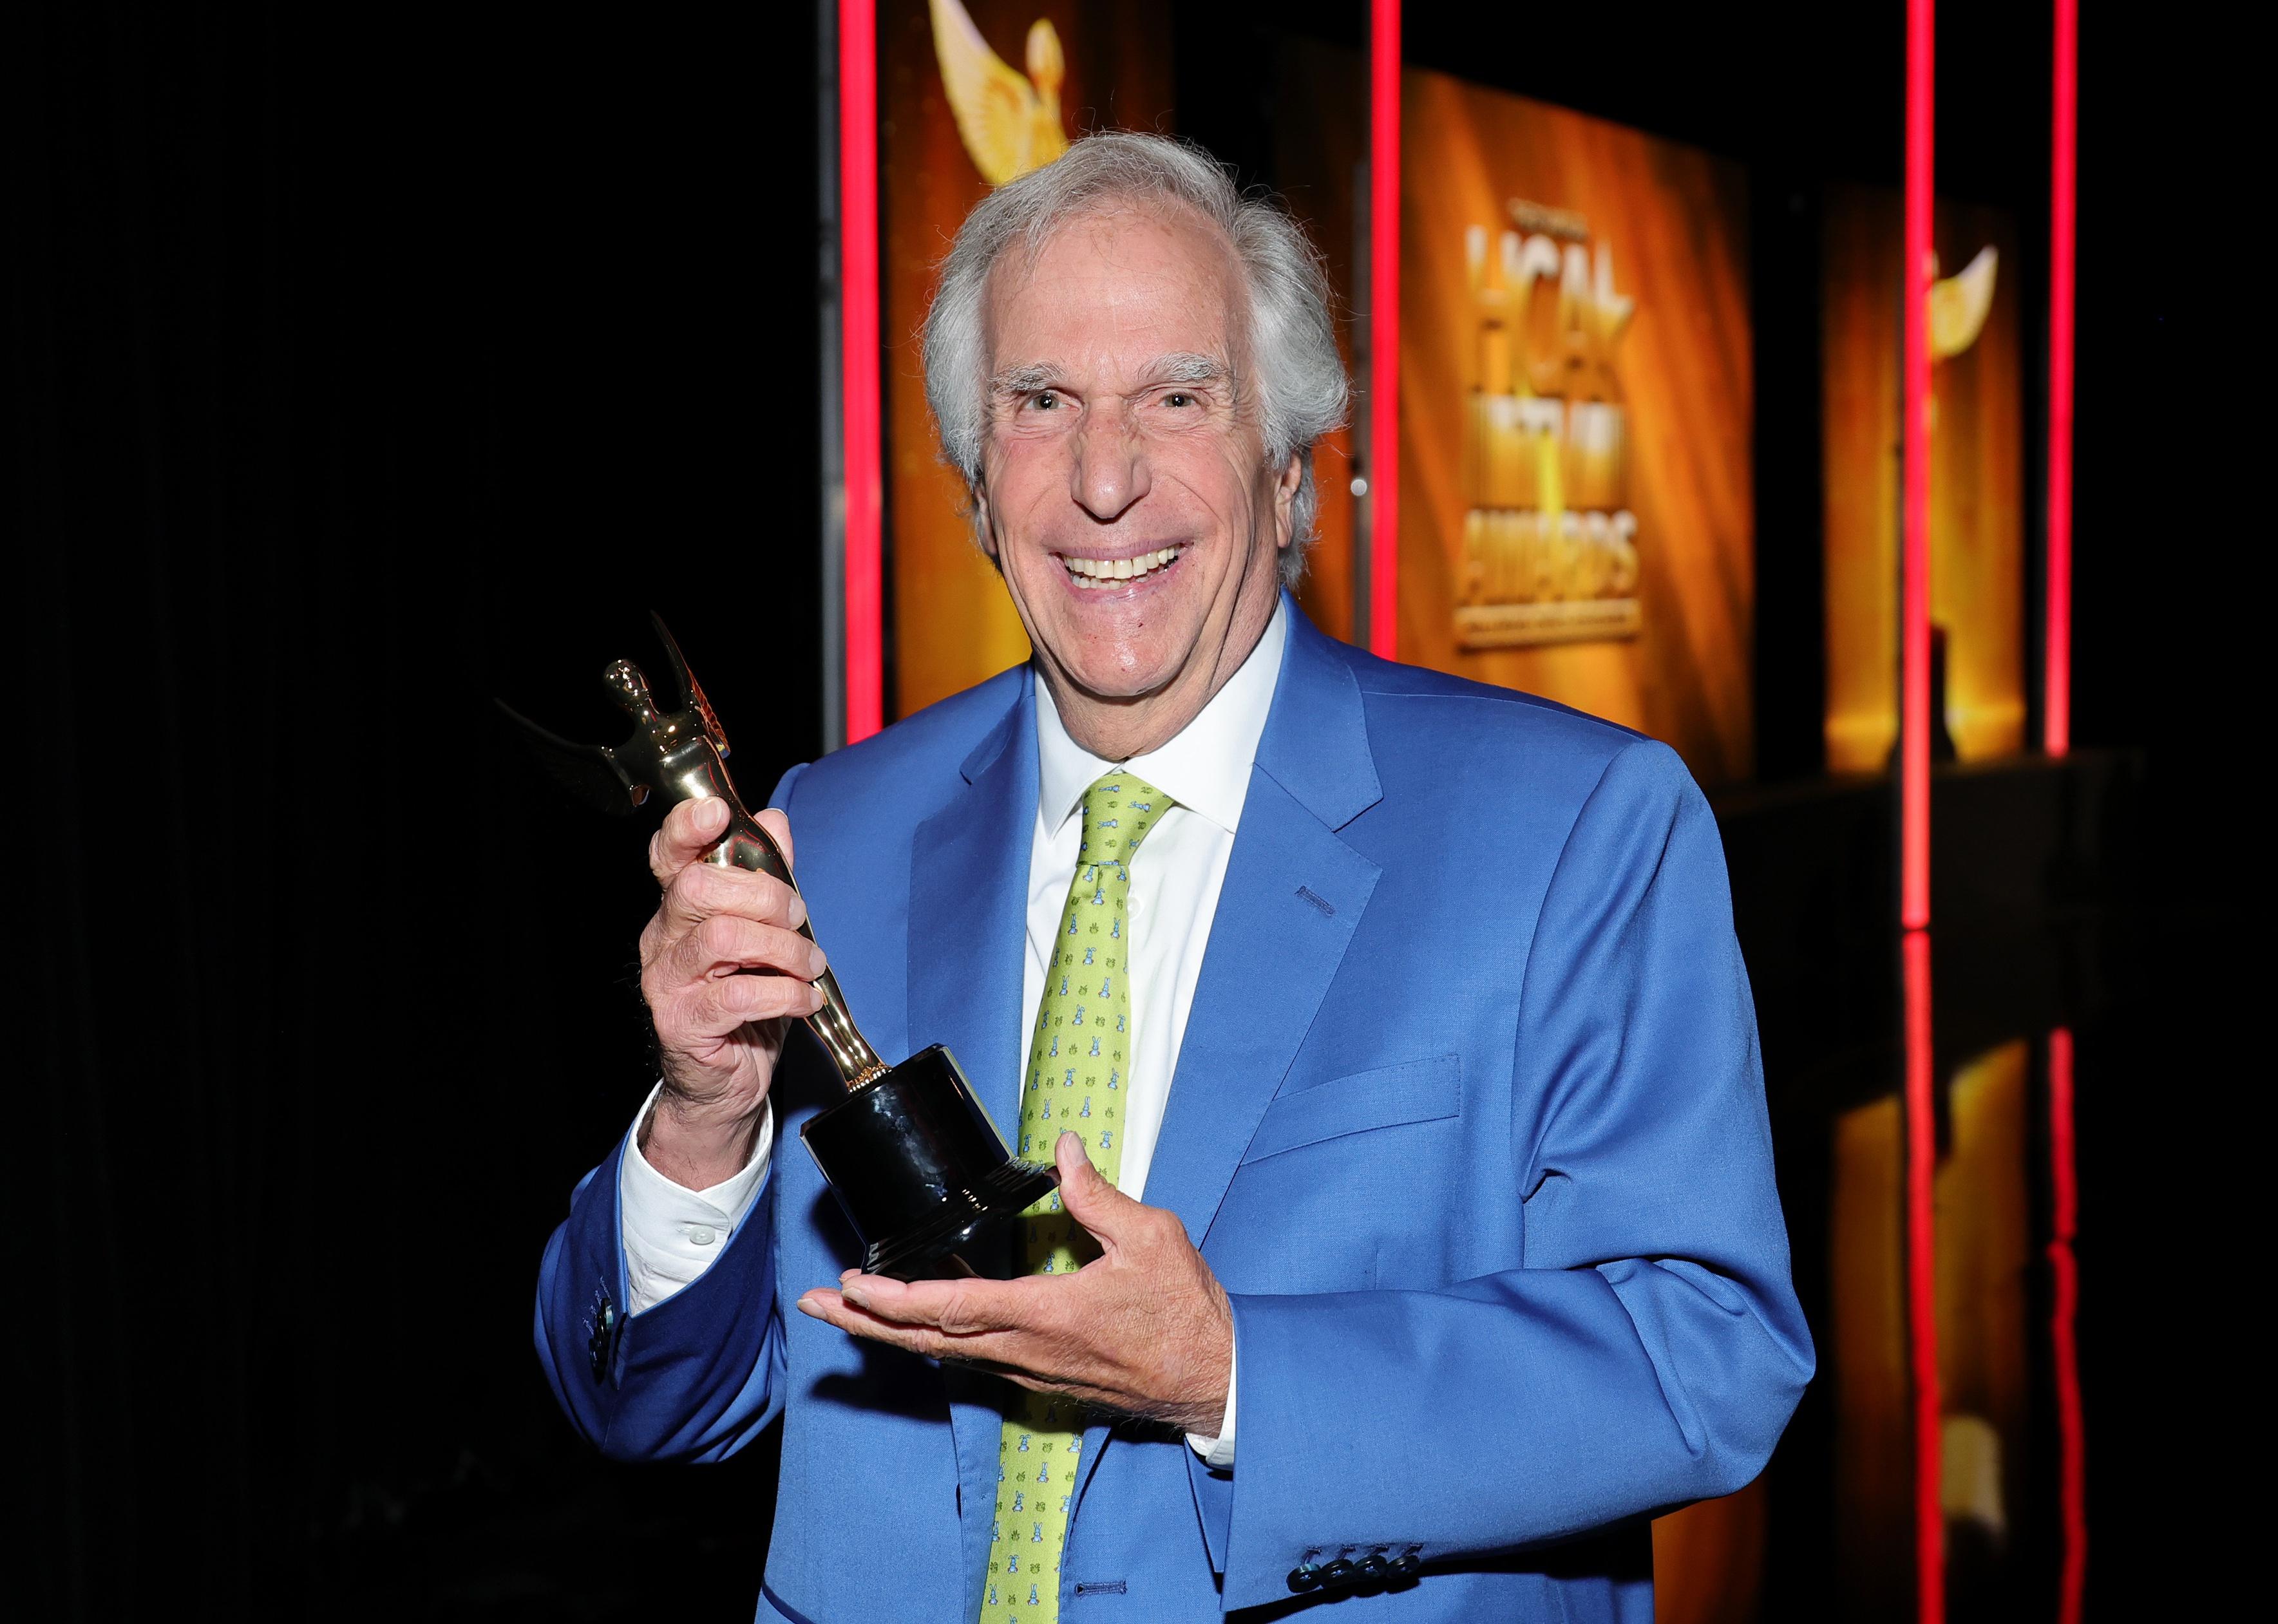 Henry Winkler poses backstage at The 2nd Annual HCA TV Awards.